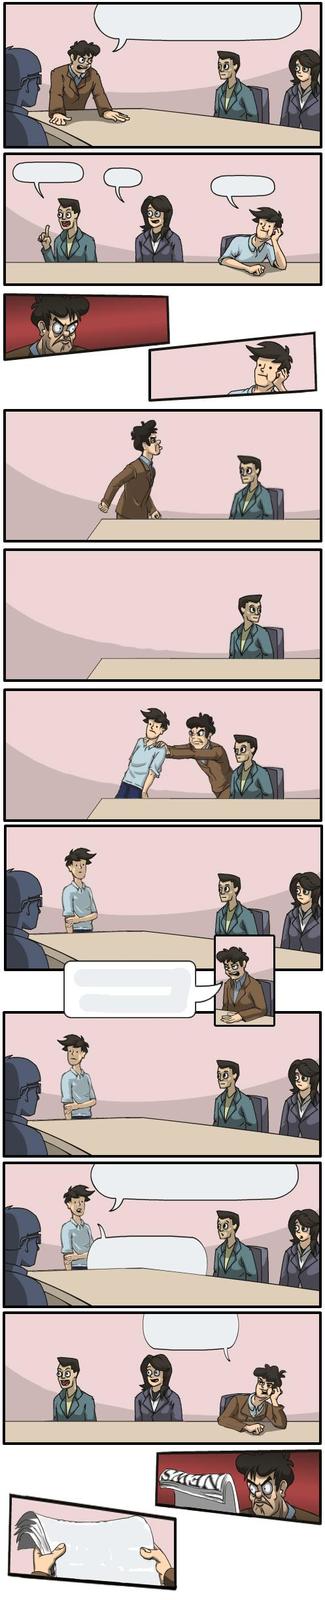 boardroom suggestion (extended) Blank Meme Template